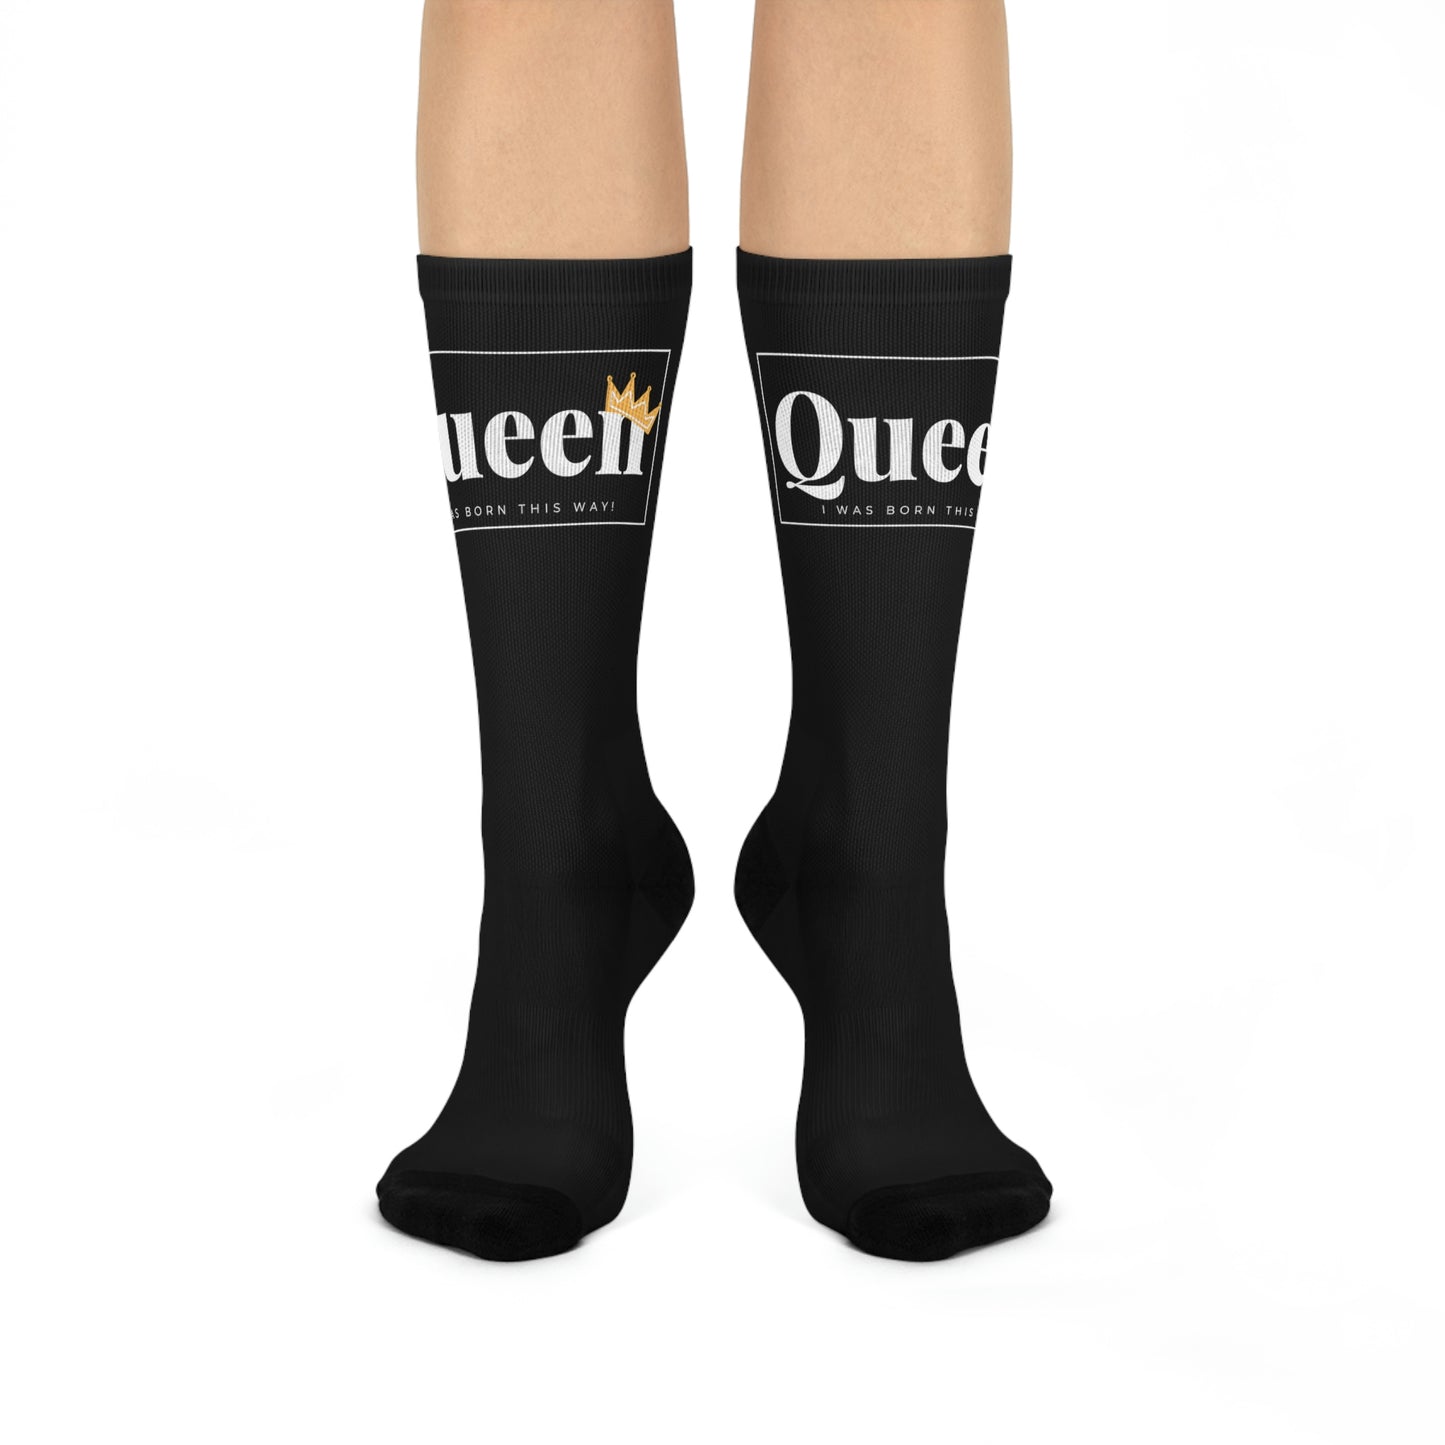 QUEEN Blue Crew Socks | BKLA | shoes & accessories | backpack, hat, phone cover, tote bags, clutch bags